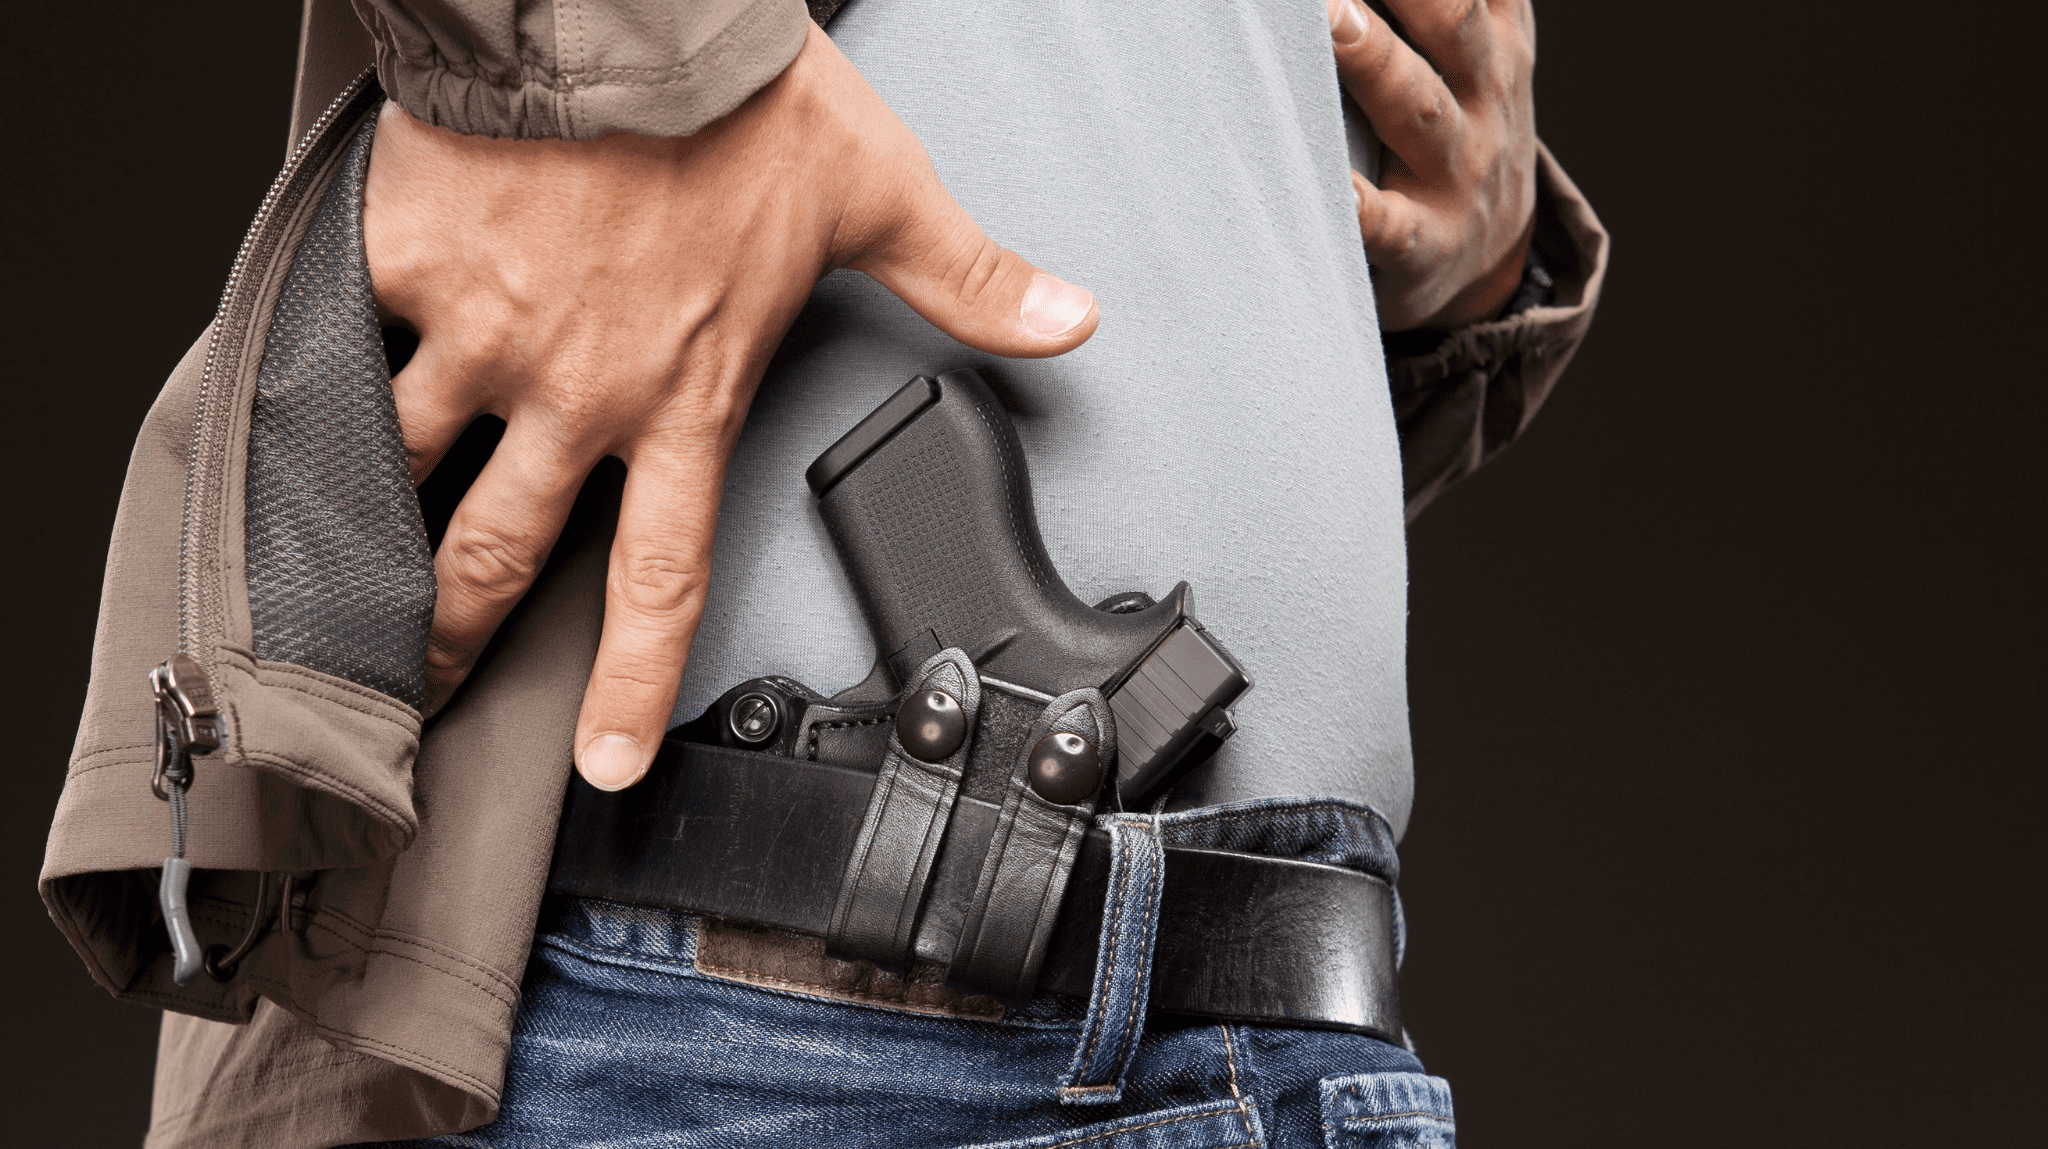 Featured image for “Permitless concealed carry bill fails in committee”